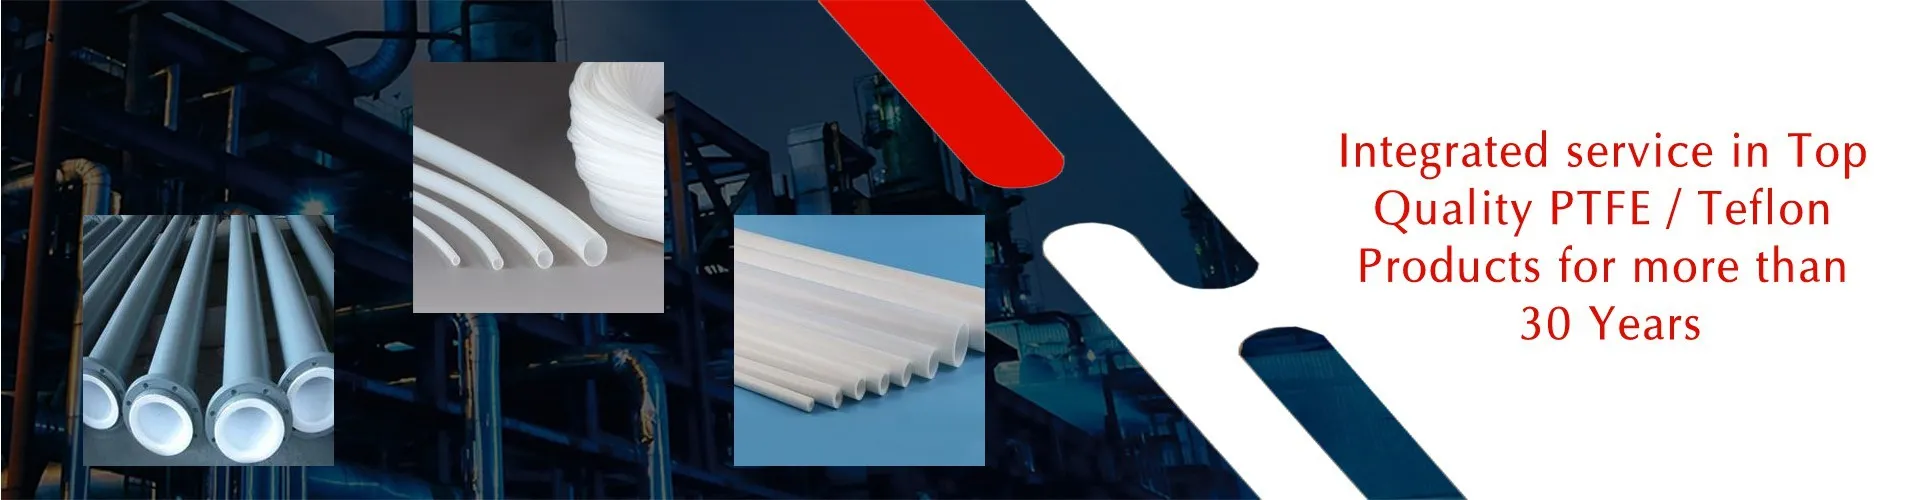 Ptfe / Teflon Products, Integrated Service In Top Quality PTFE / Teflon Products, Bronze Filled Ptfe Products, Bushes, Butterfly Sleeves, Crescent Rings, Elbows, Envelop Gaskets, Expanded Sheets, Expansion Joints, Extruded Rods, Gland Packings, Gland Packings, Graphite Filled Ptfe Products, Lined Pipes 